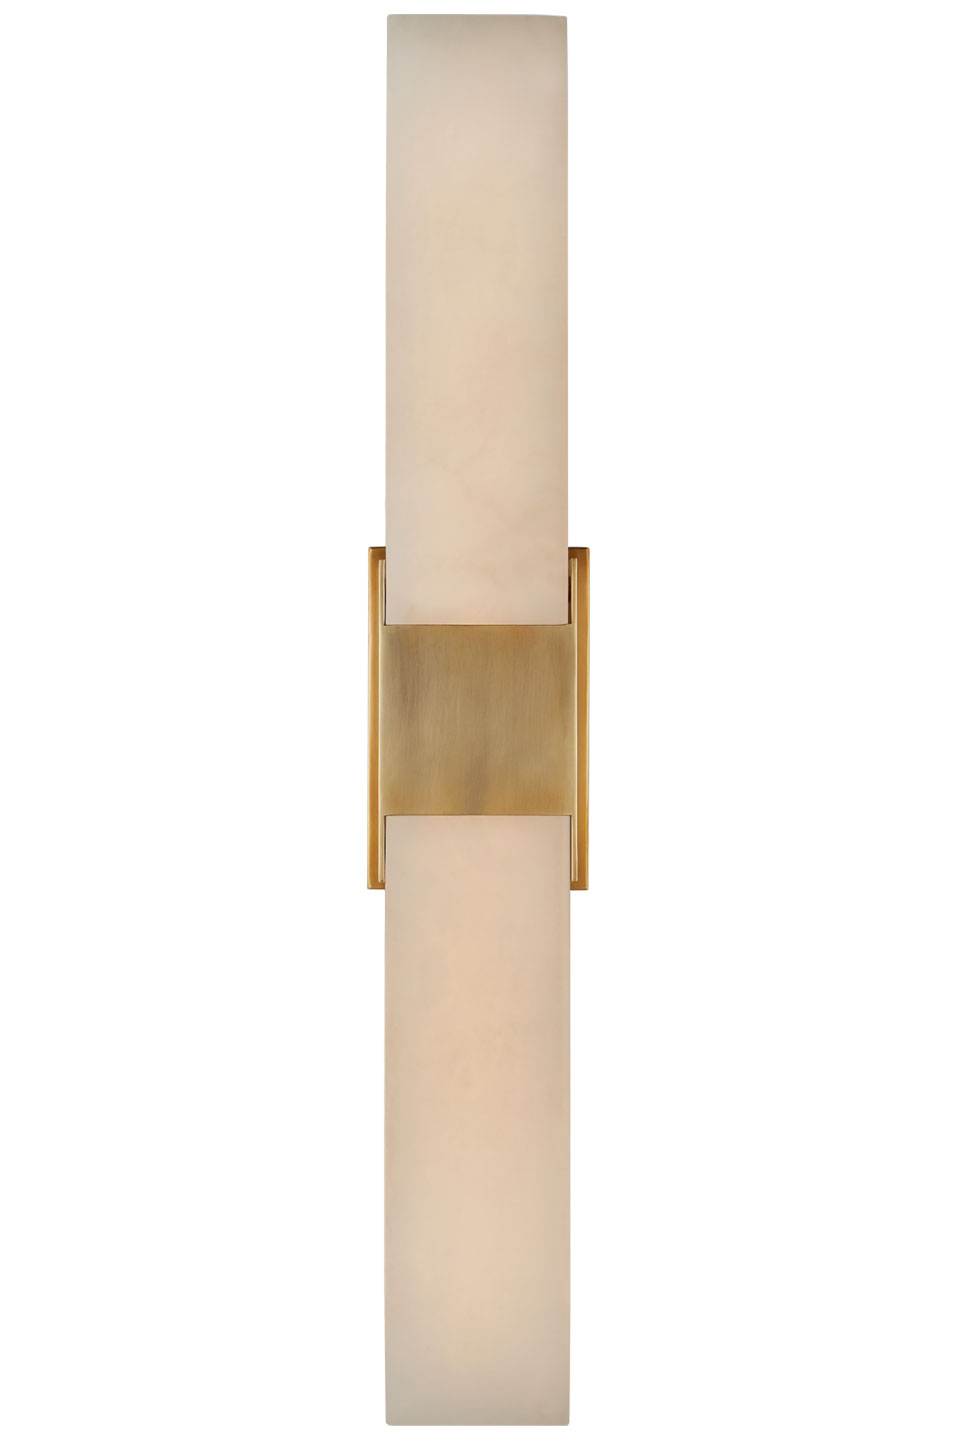 Covet double sconce in alabaster and gold. Visual Comfort&Co.. 